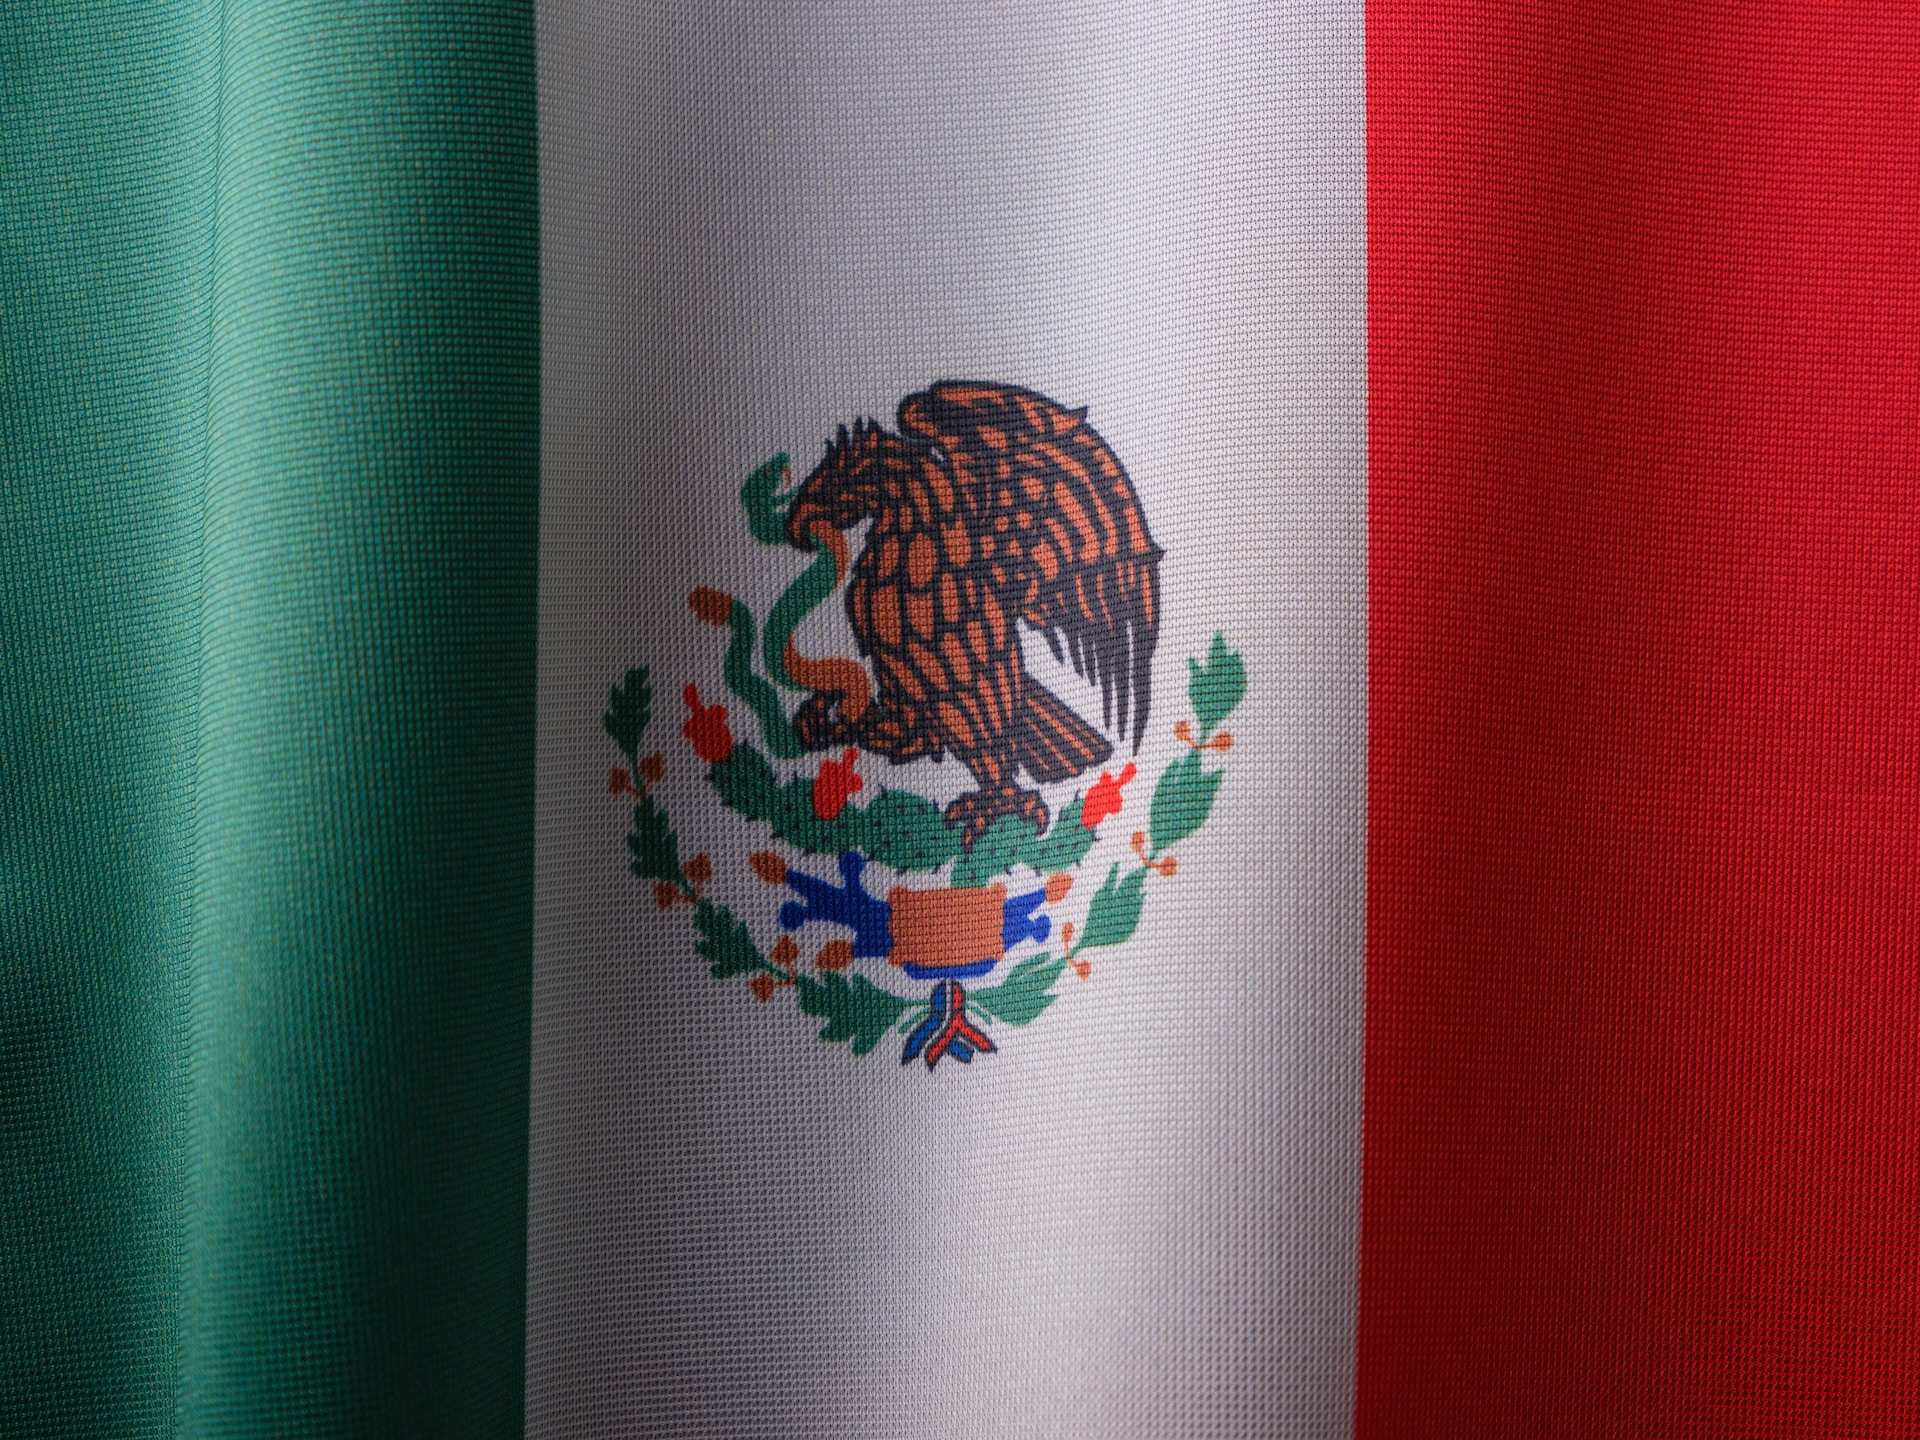 Employment Rules and Regulations in Mexico